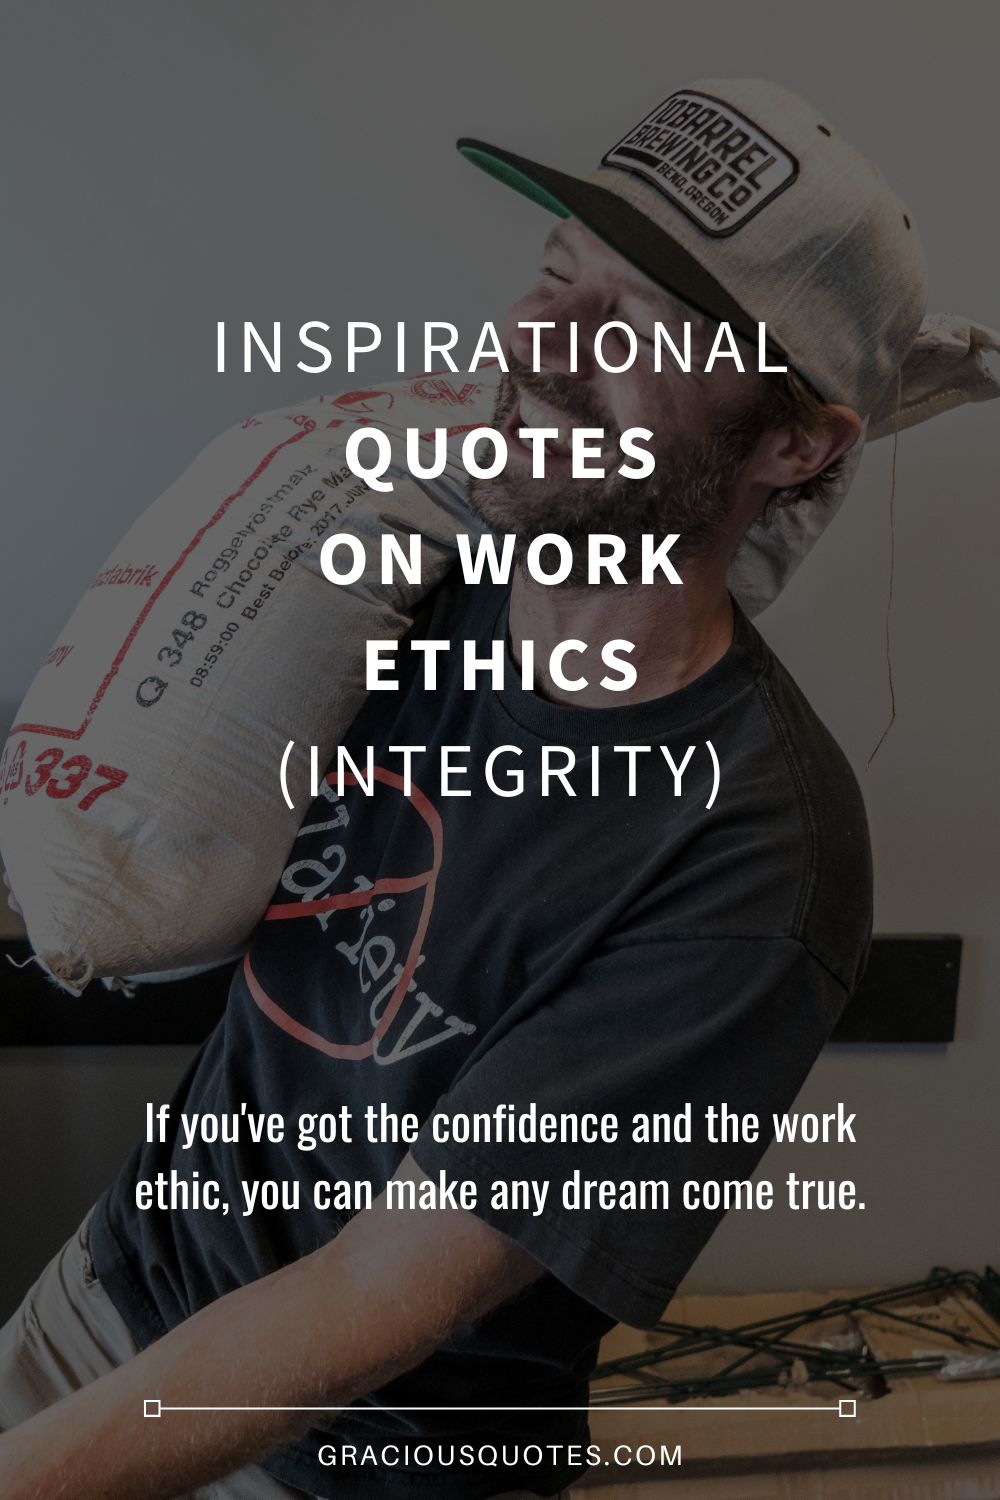 Inspirational Quotes on Work Ethics (INTEGRITY) - Gracious Quotes